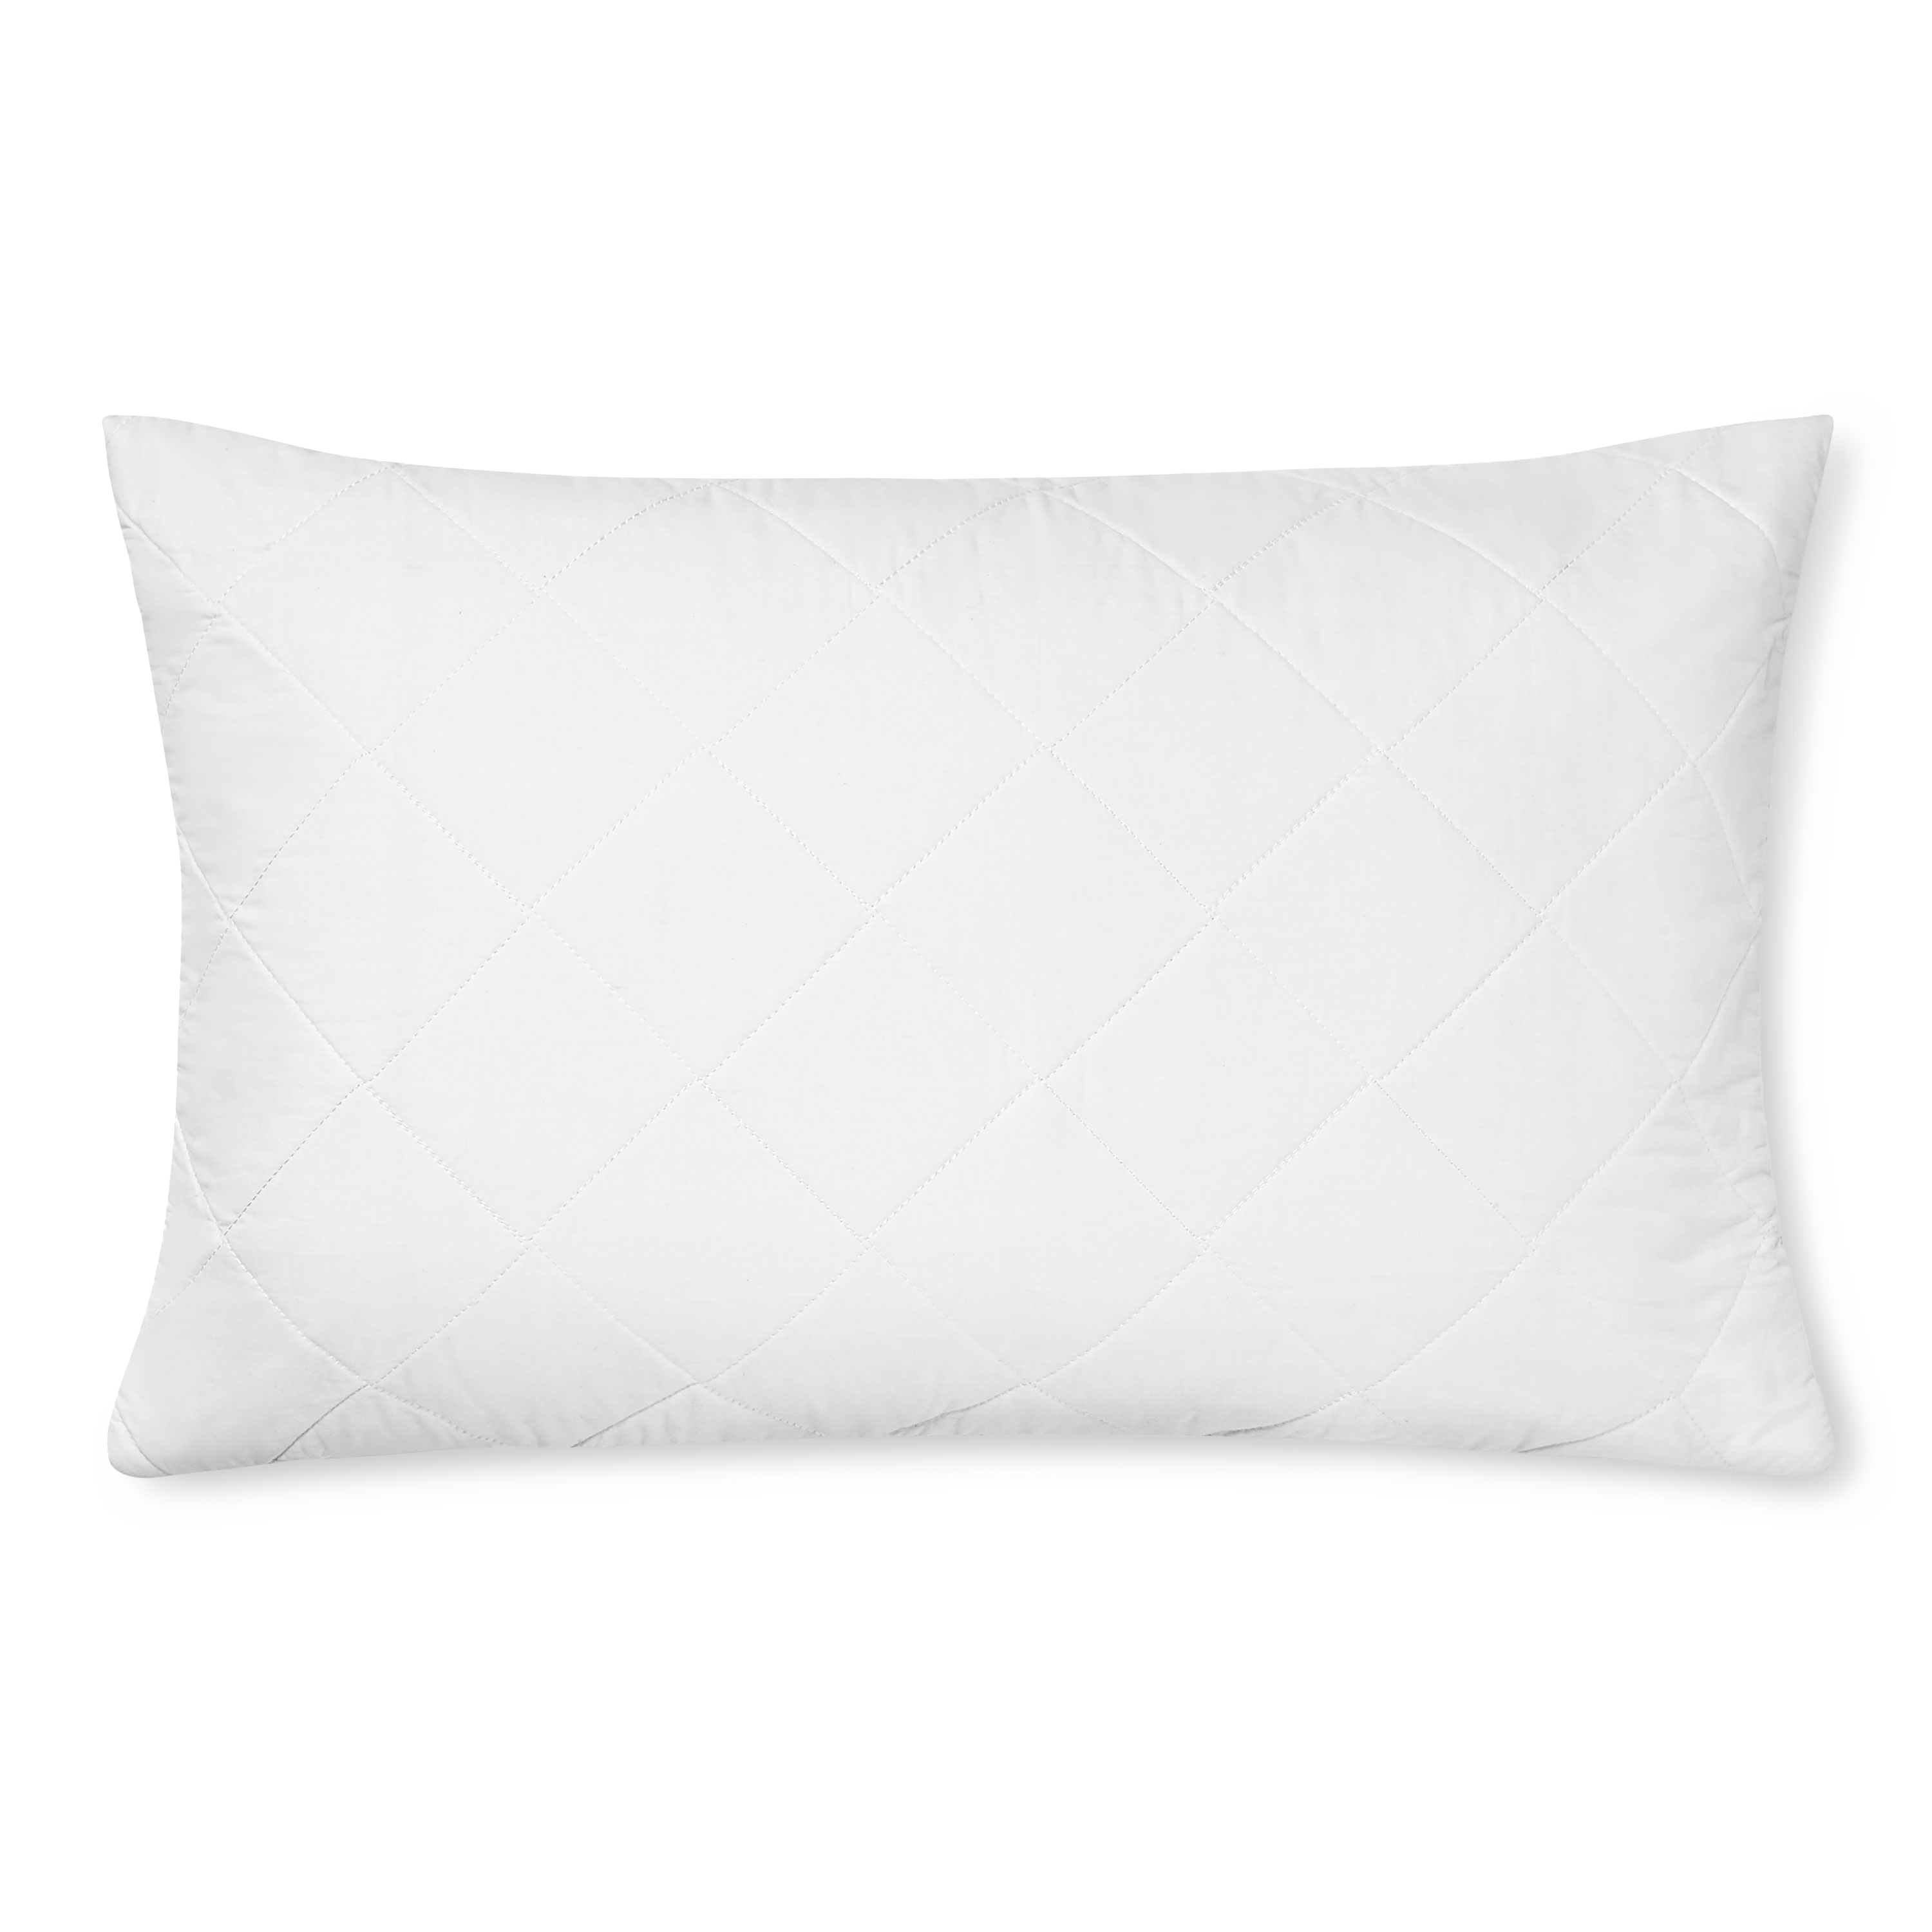 Quilted Cotton Pillow Protector